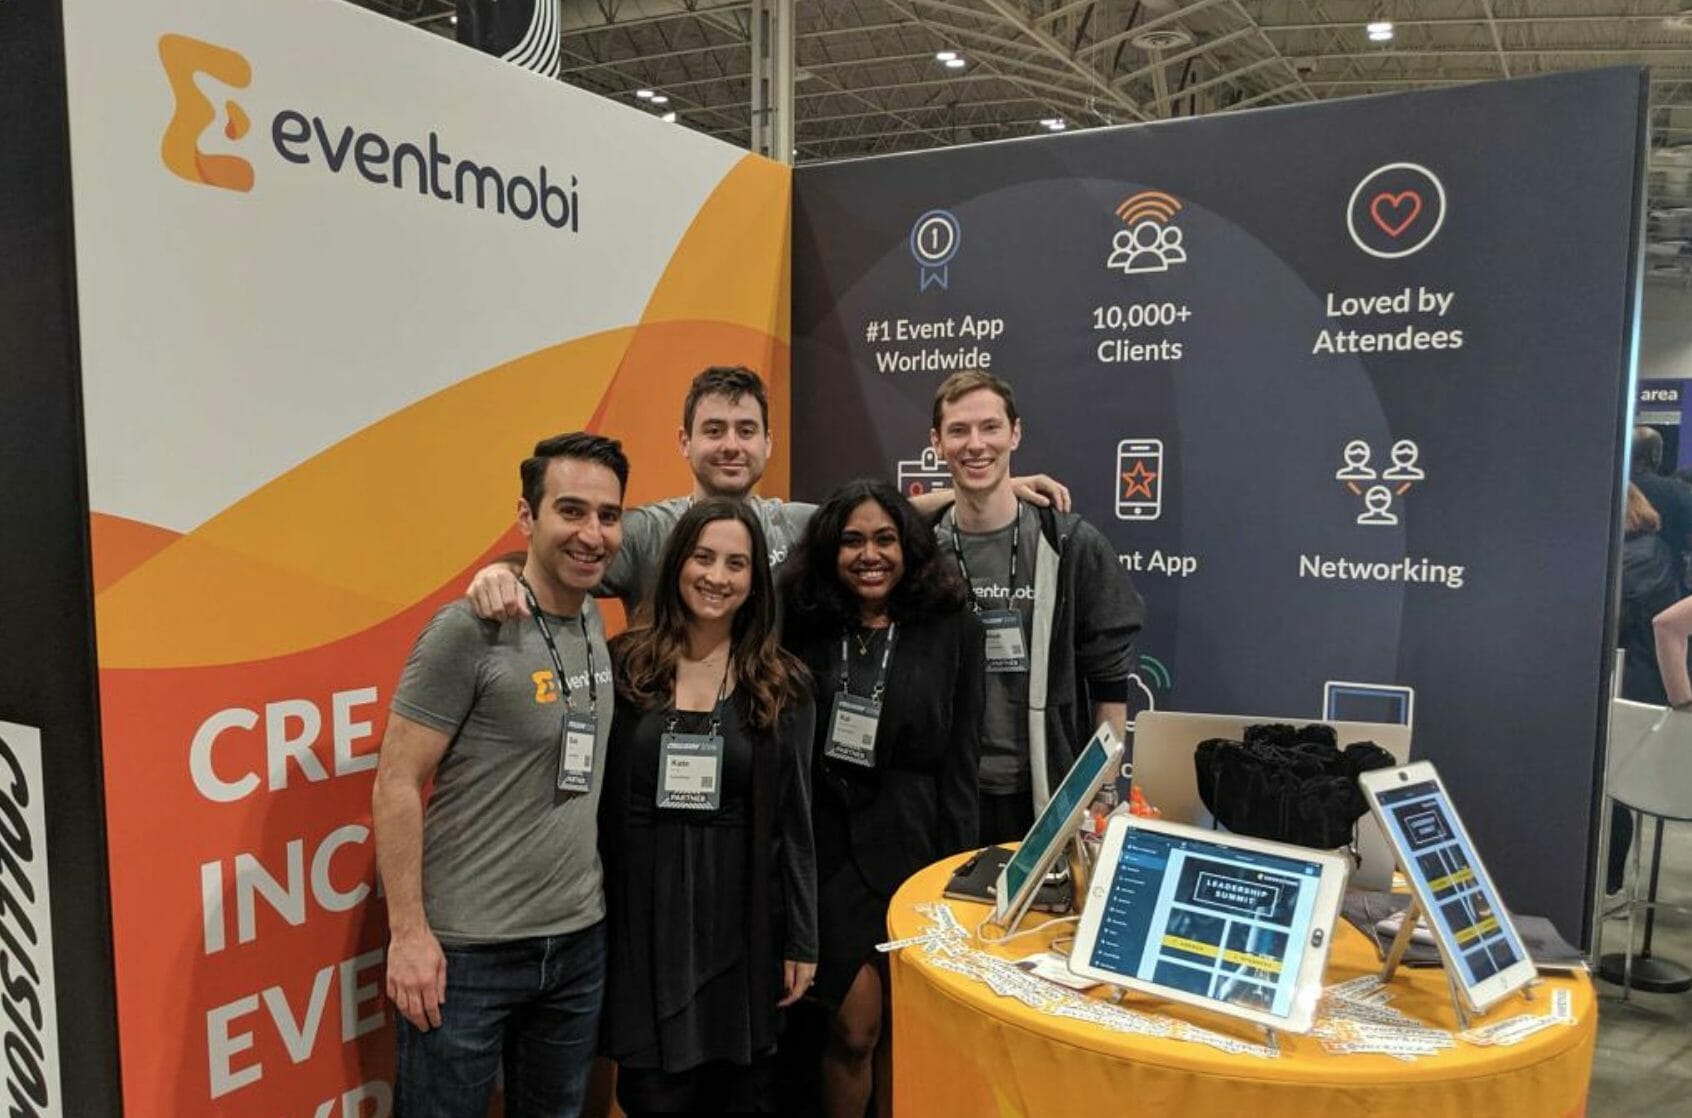 eventmobi booth at collision conference 2019